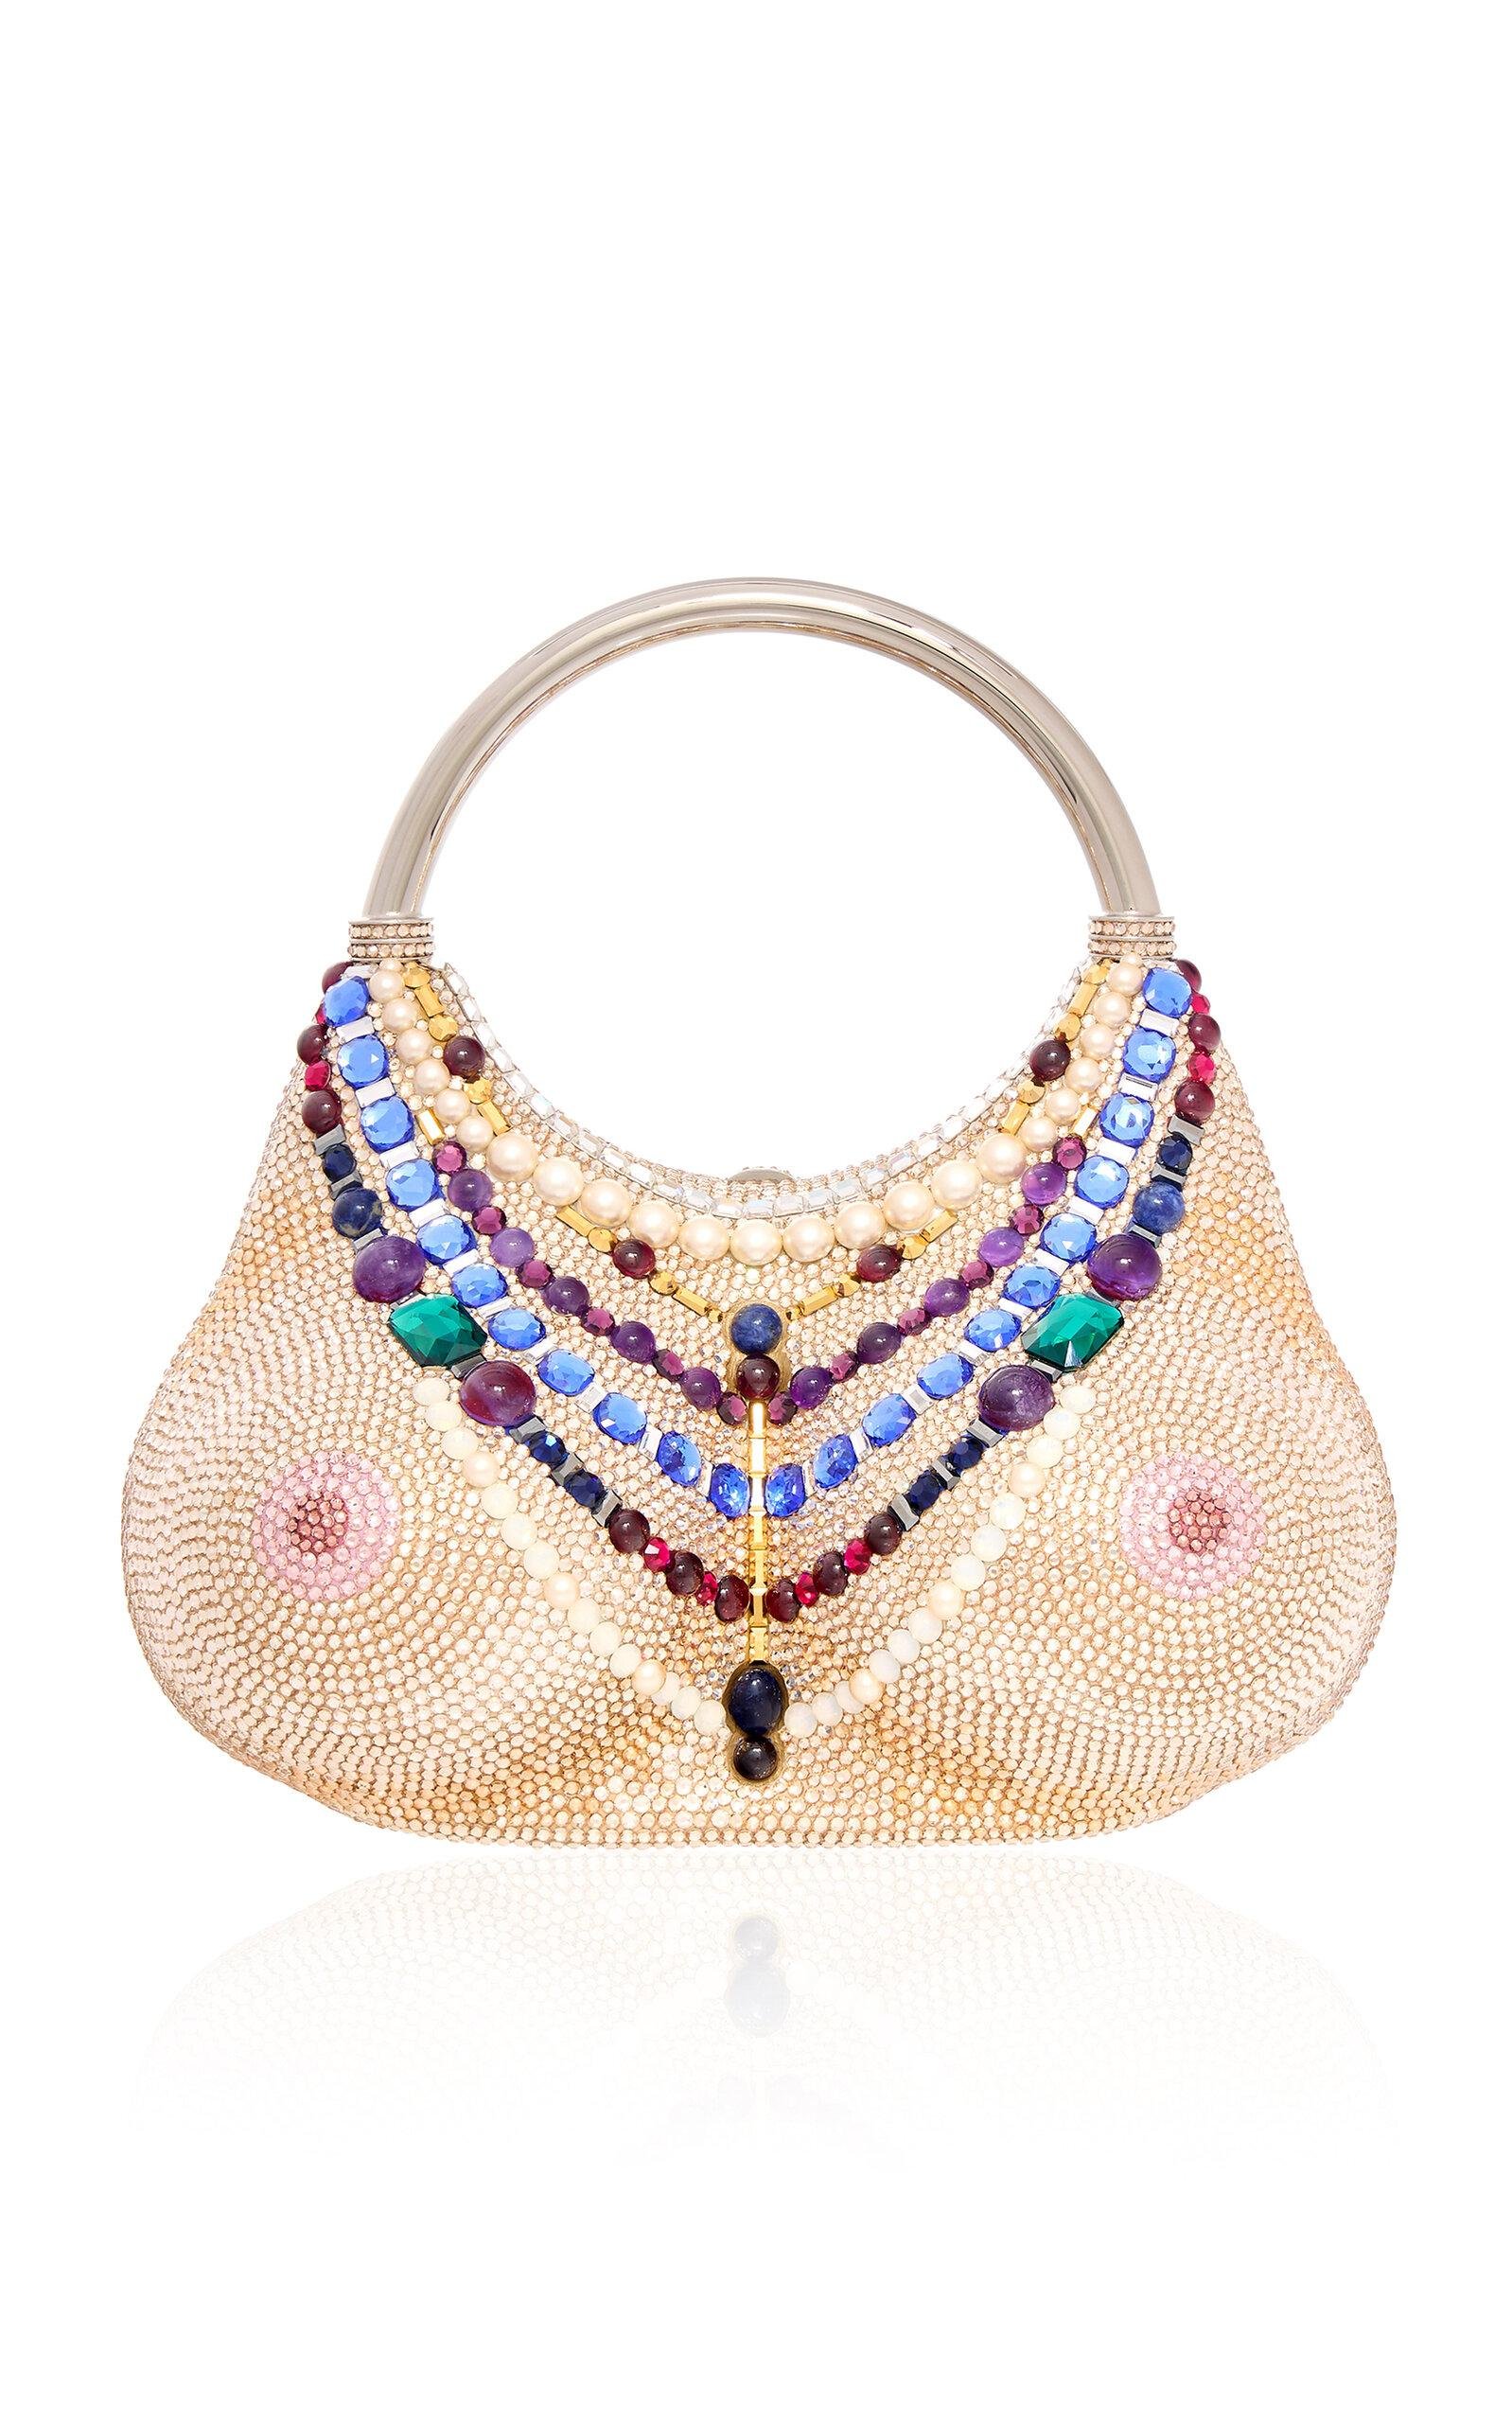 Judith Leiber Couture - Nude Bust Crystal Clutch - Gold - OS - Only At Moda Operandi by JUDITH LEIBER COUTURE